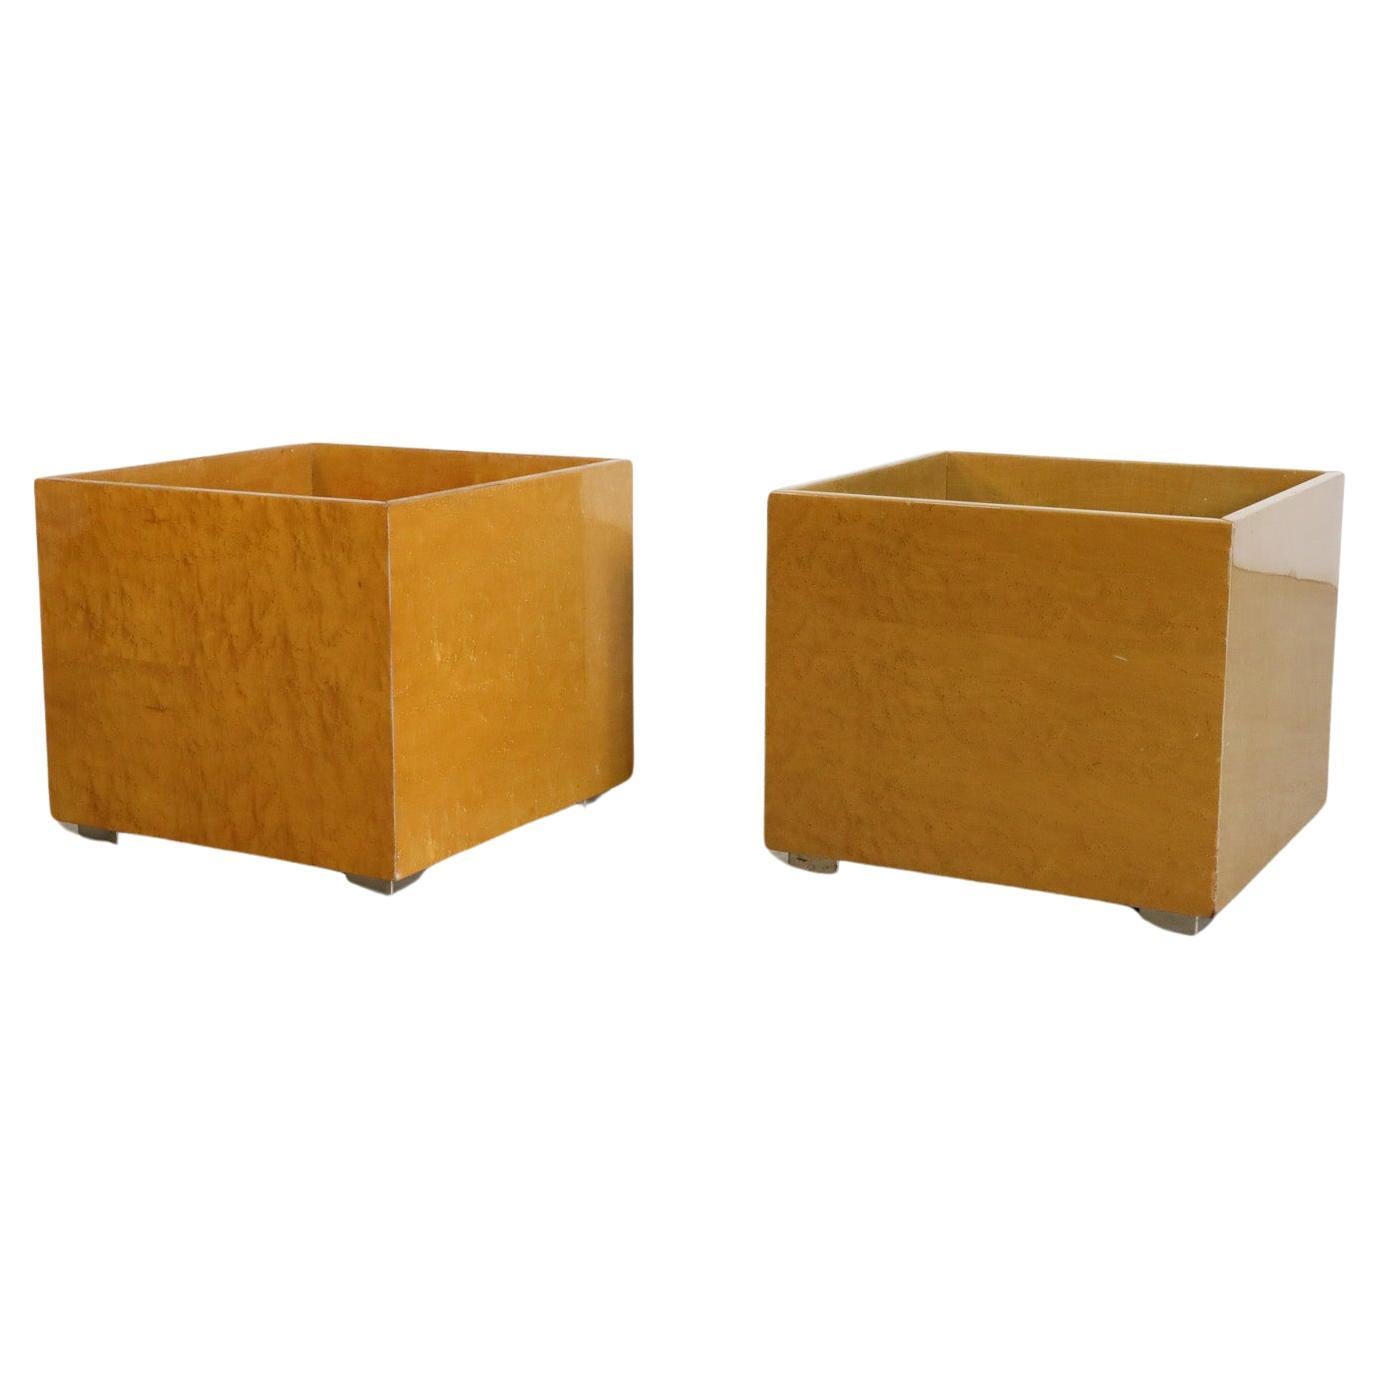 Giovanni Offredi High Gloss Bird's Eye Maple Planters For Saporiti, Italy For Sale